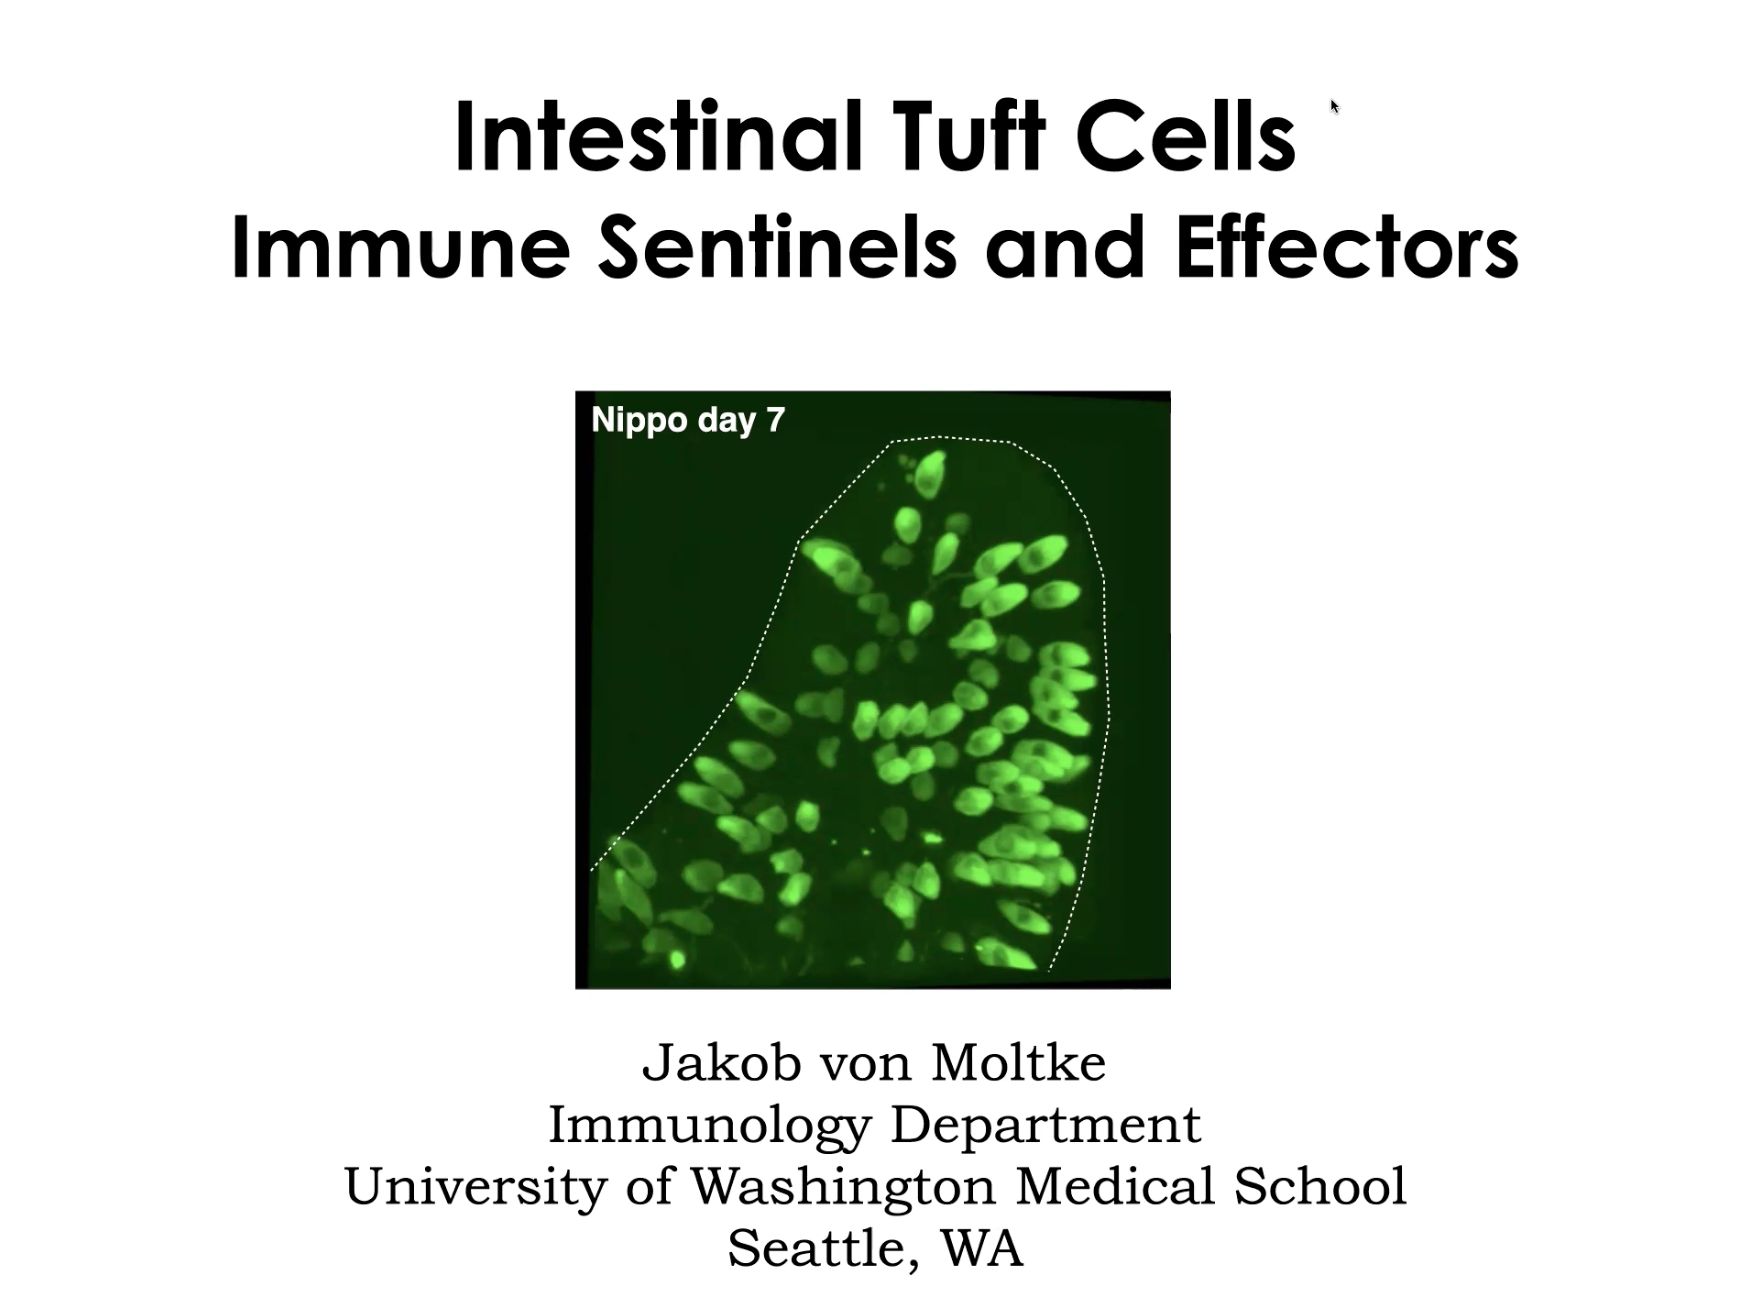 Small Intestinal Tuft Cells Sentinels and effectors of type 2 immunity